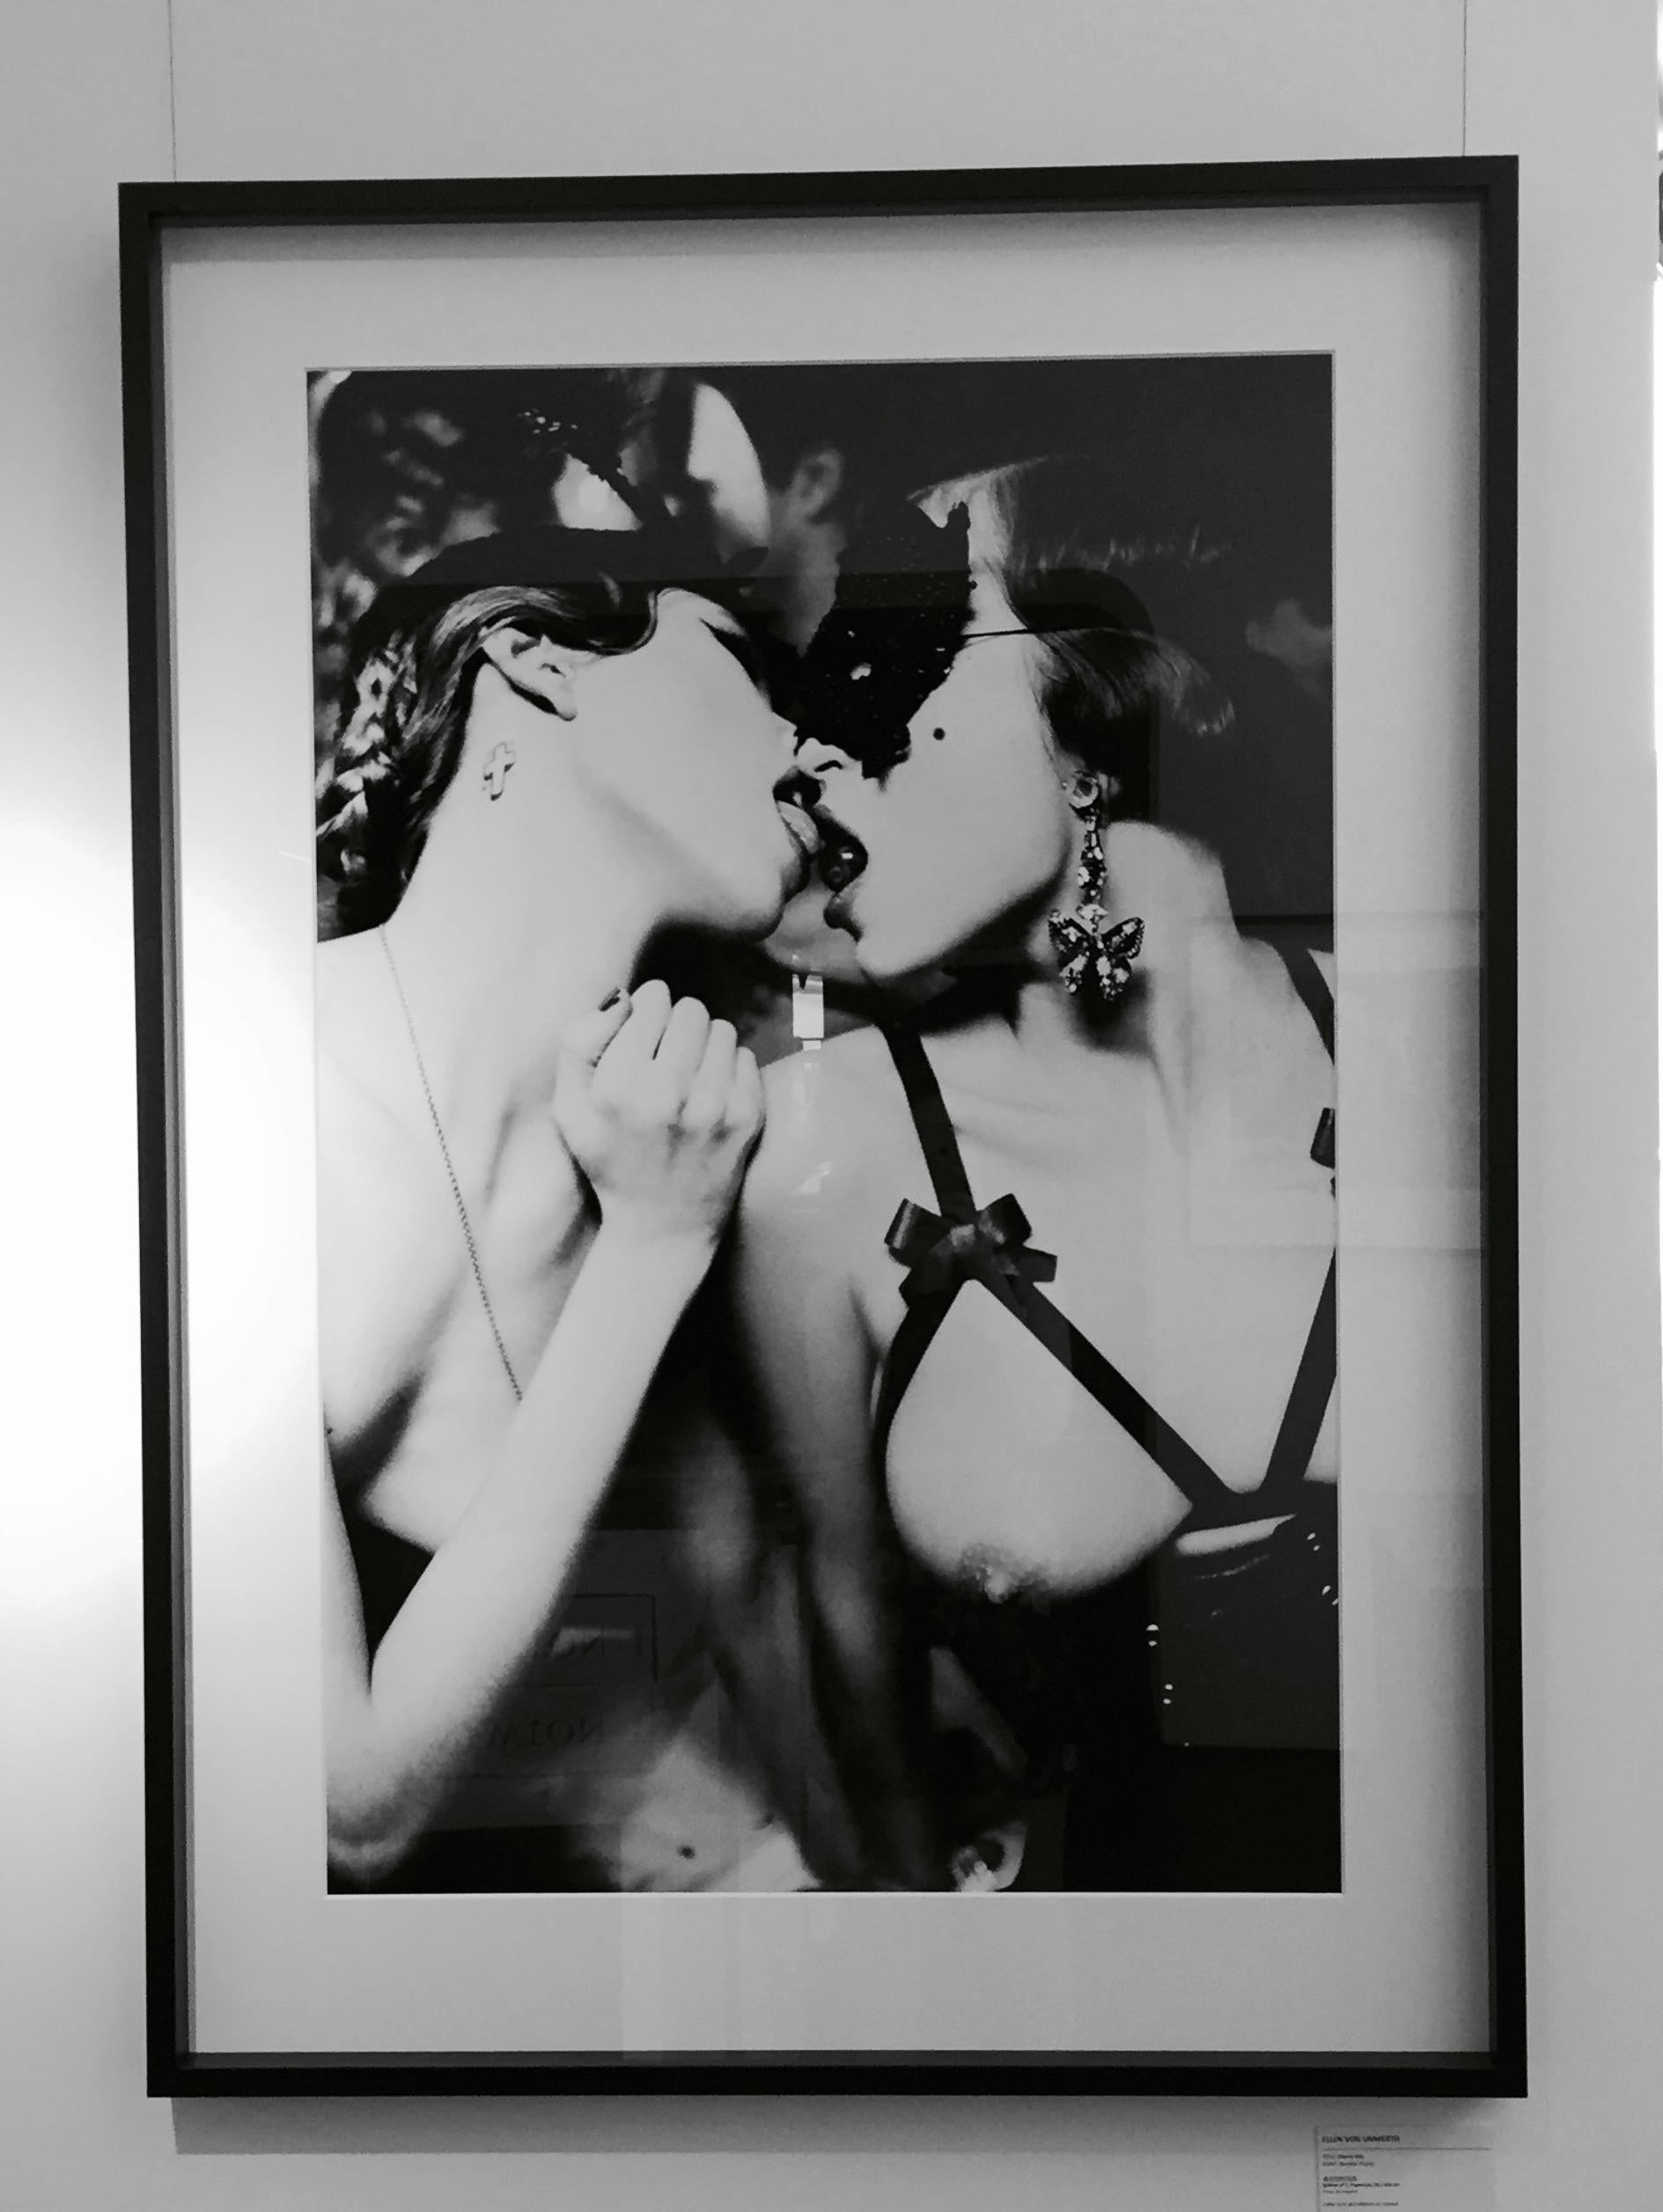 Cherry Kiss - two models with a mask on kissing each other - Photograph by Ellen von Unwerth